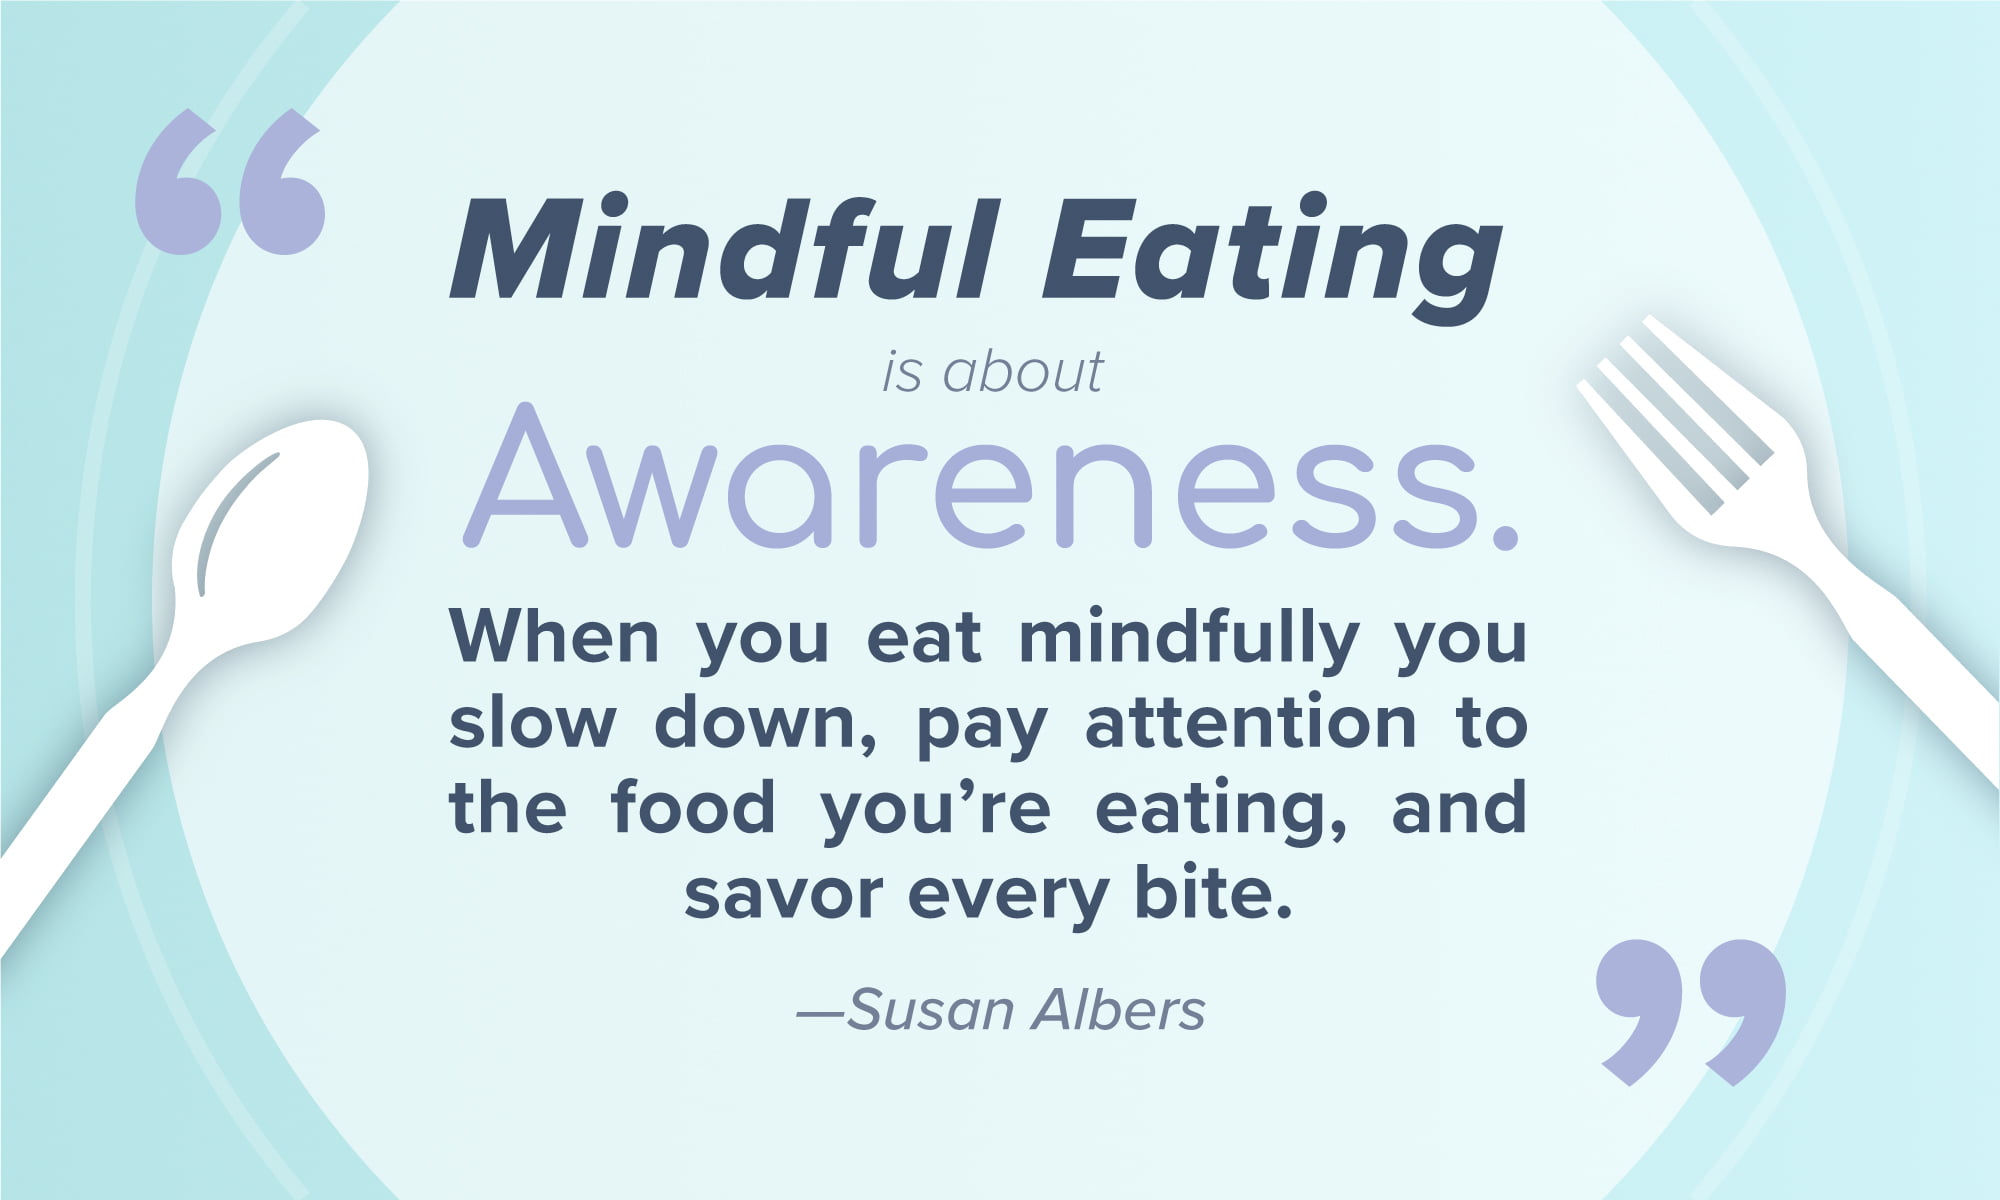 A graphic featuring a quote by Susan Albers: "Mindful eating is about awareness. When you eat mindfully, you slow down, pay attention to the food you're eating, and savor every bite."